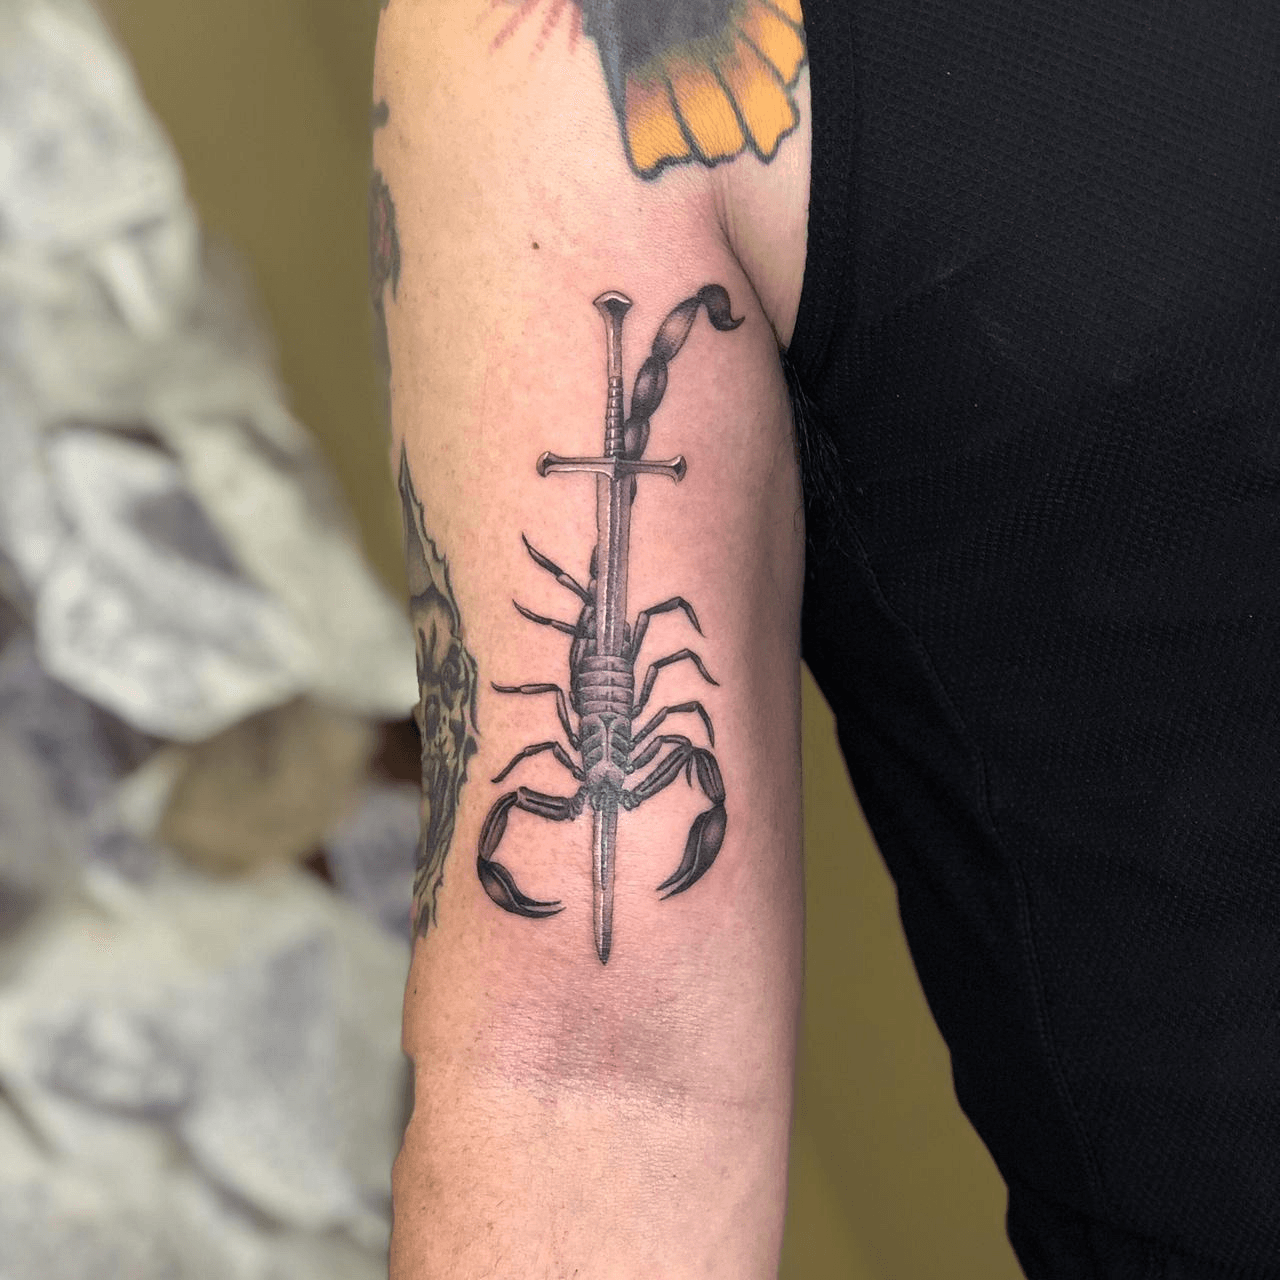 Tattoo uploaded by Tom Kelly  Survival by tooth and nail  Tattoodo